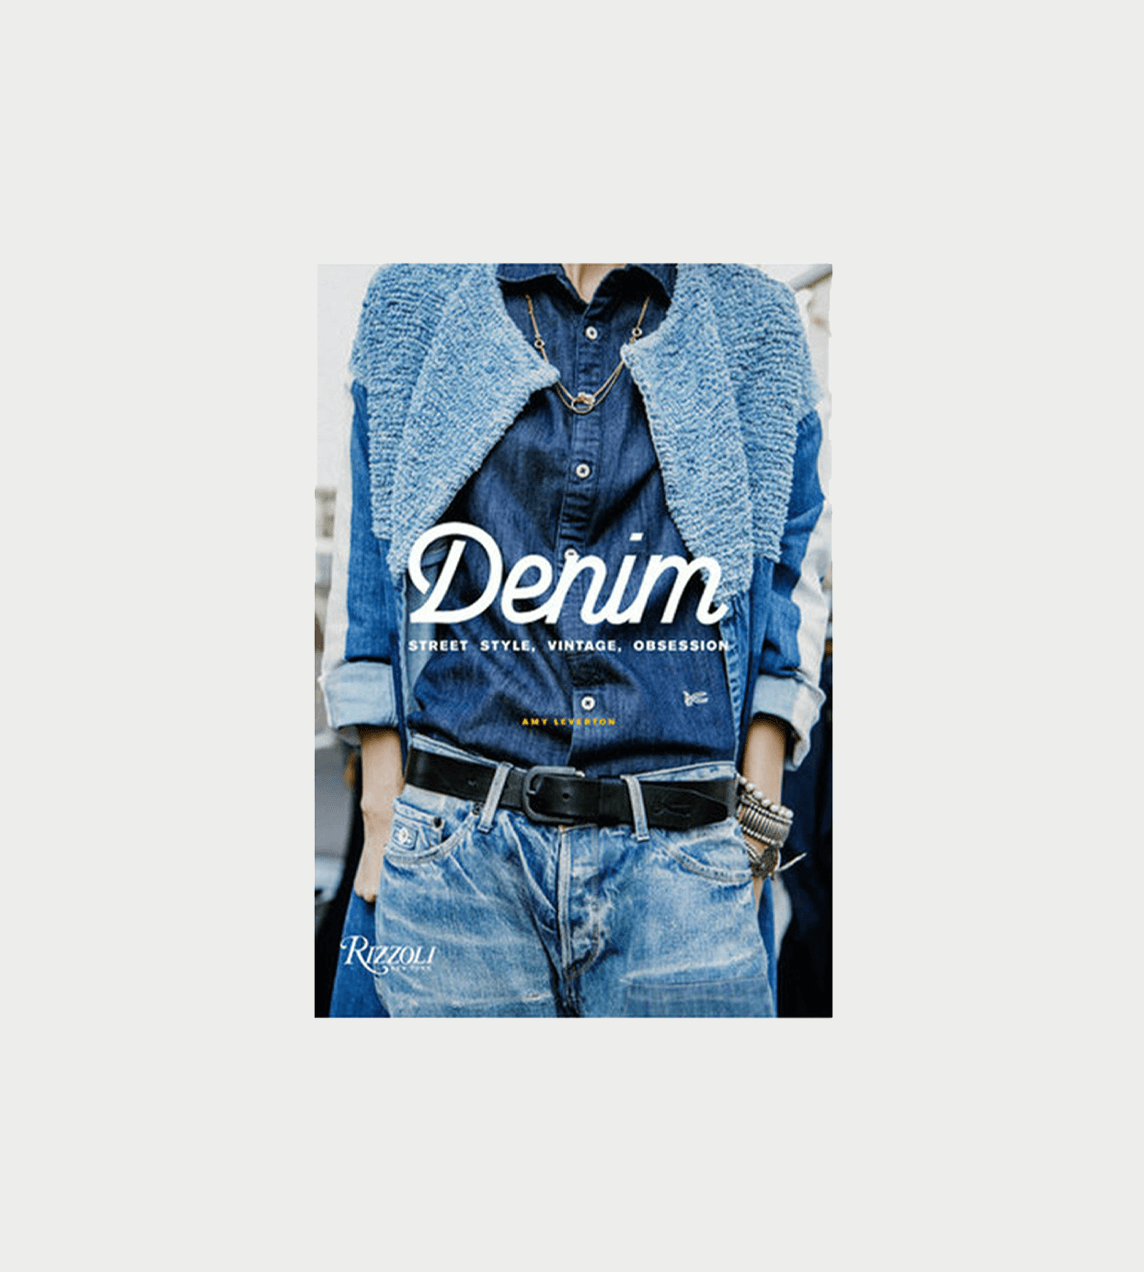 Rizzoli - Denim: Street Style, Vintage, Obsession Book